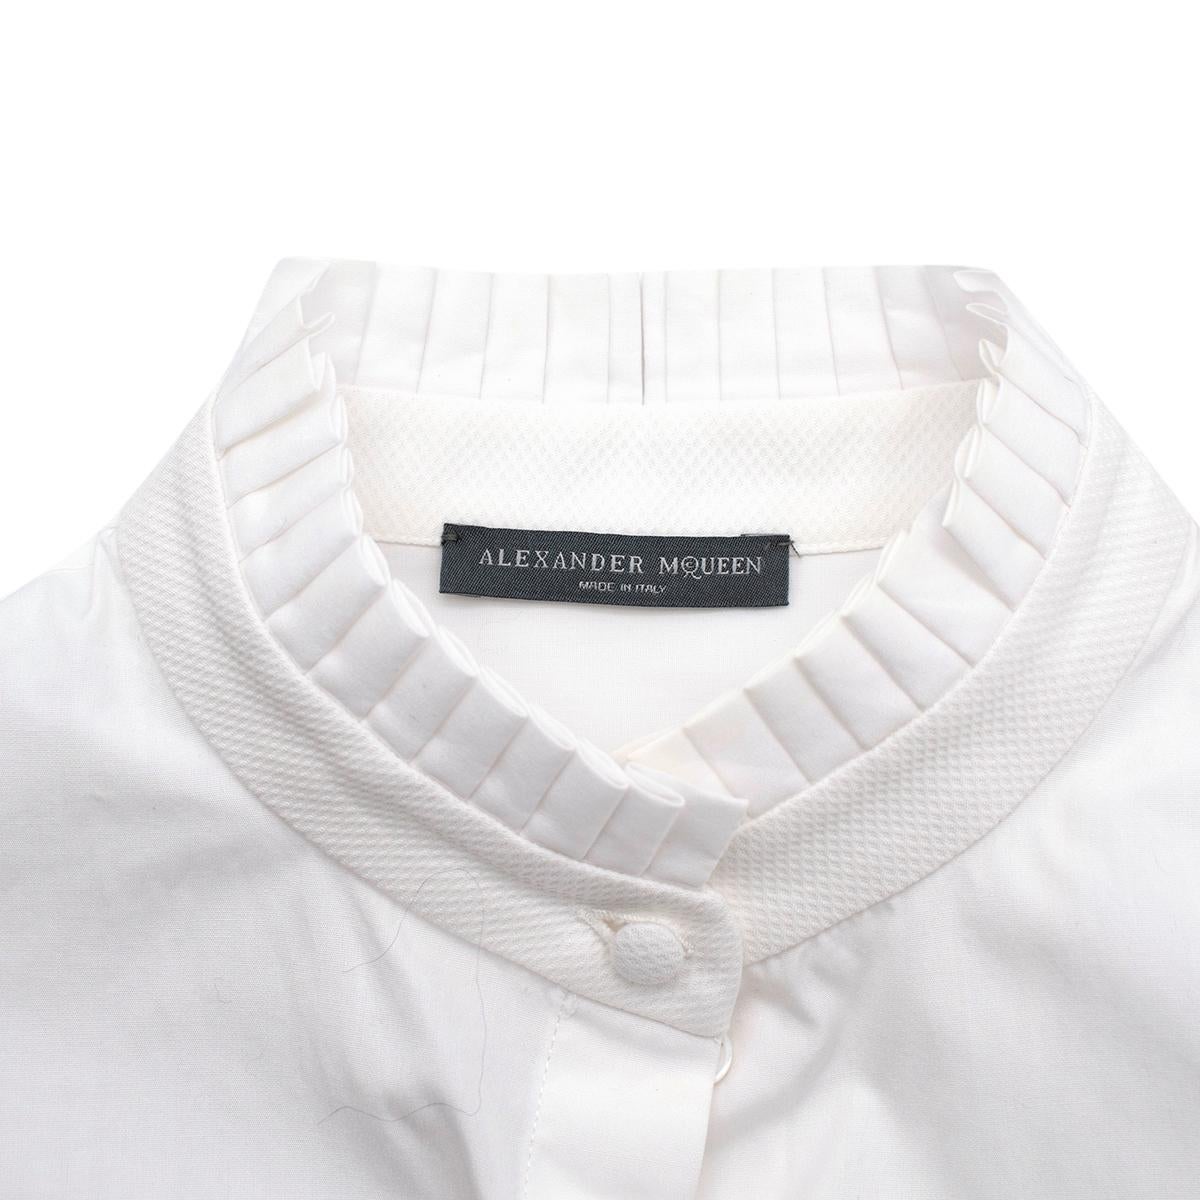 Alexander McQueen White Poplin & Waffle Cotton Shirt US 2-4 In Excellent Condition For Sale In London, GB